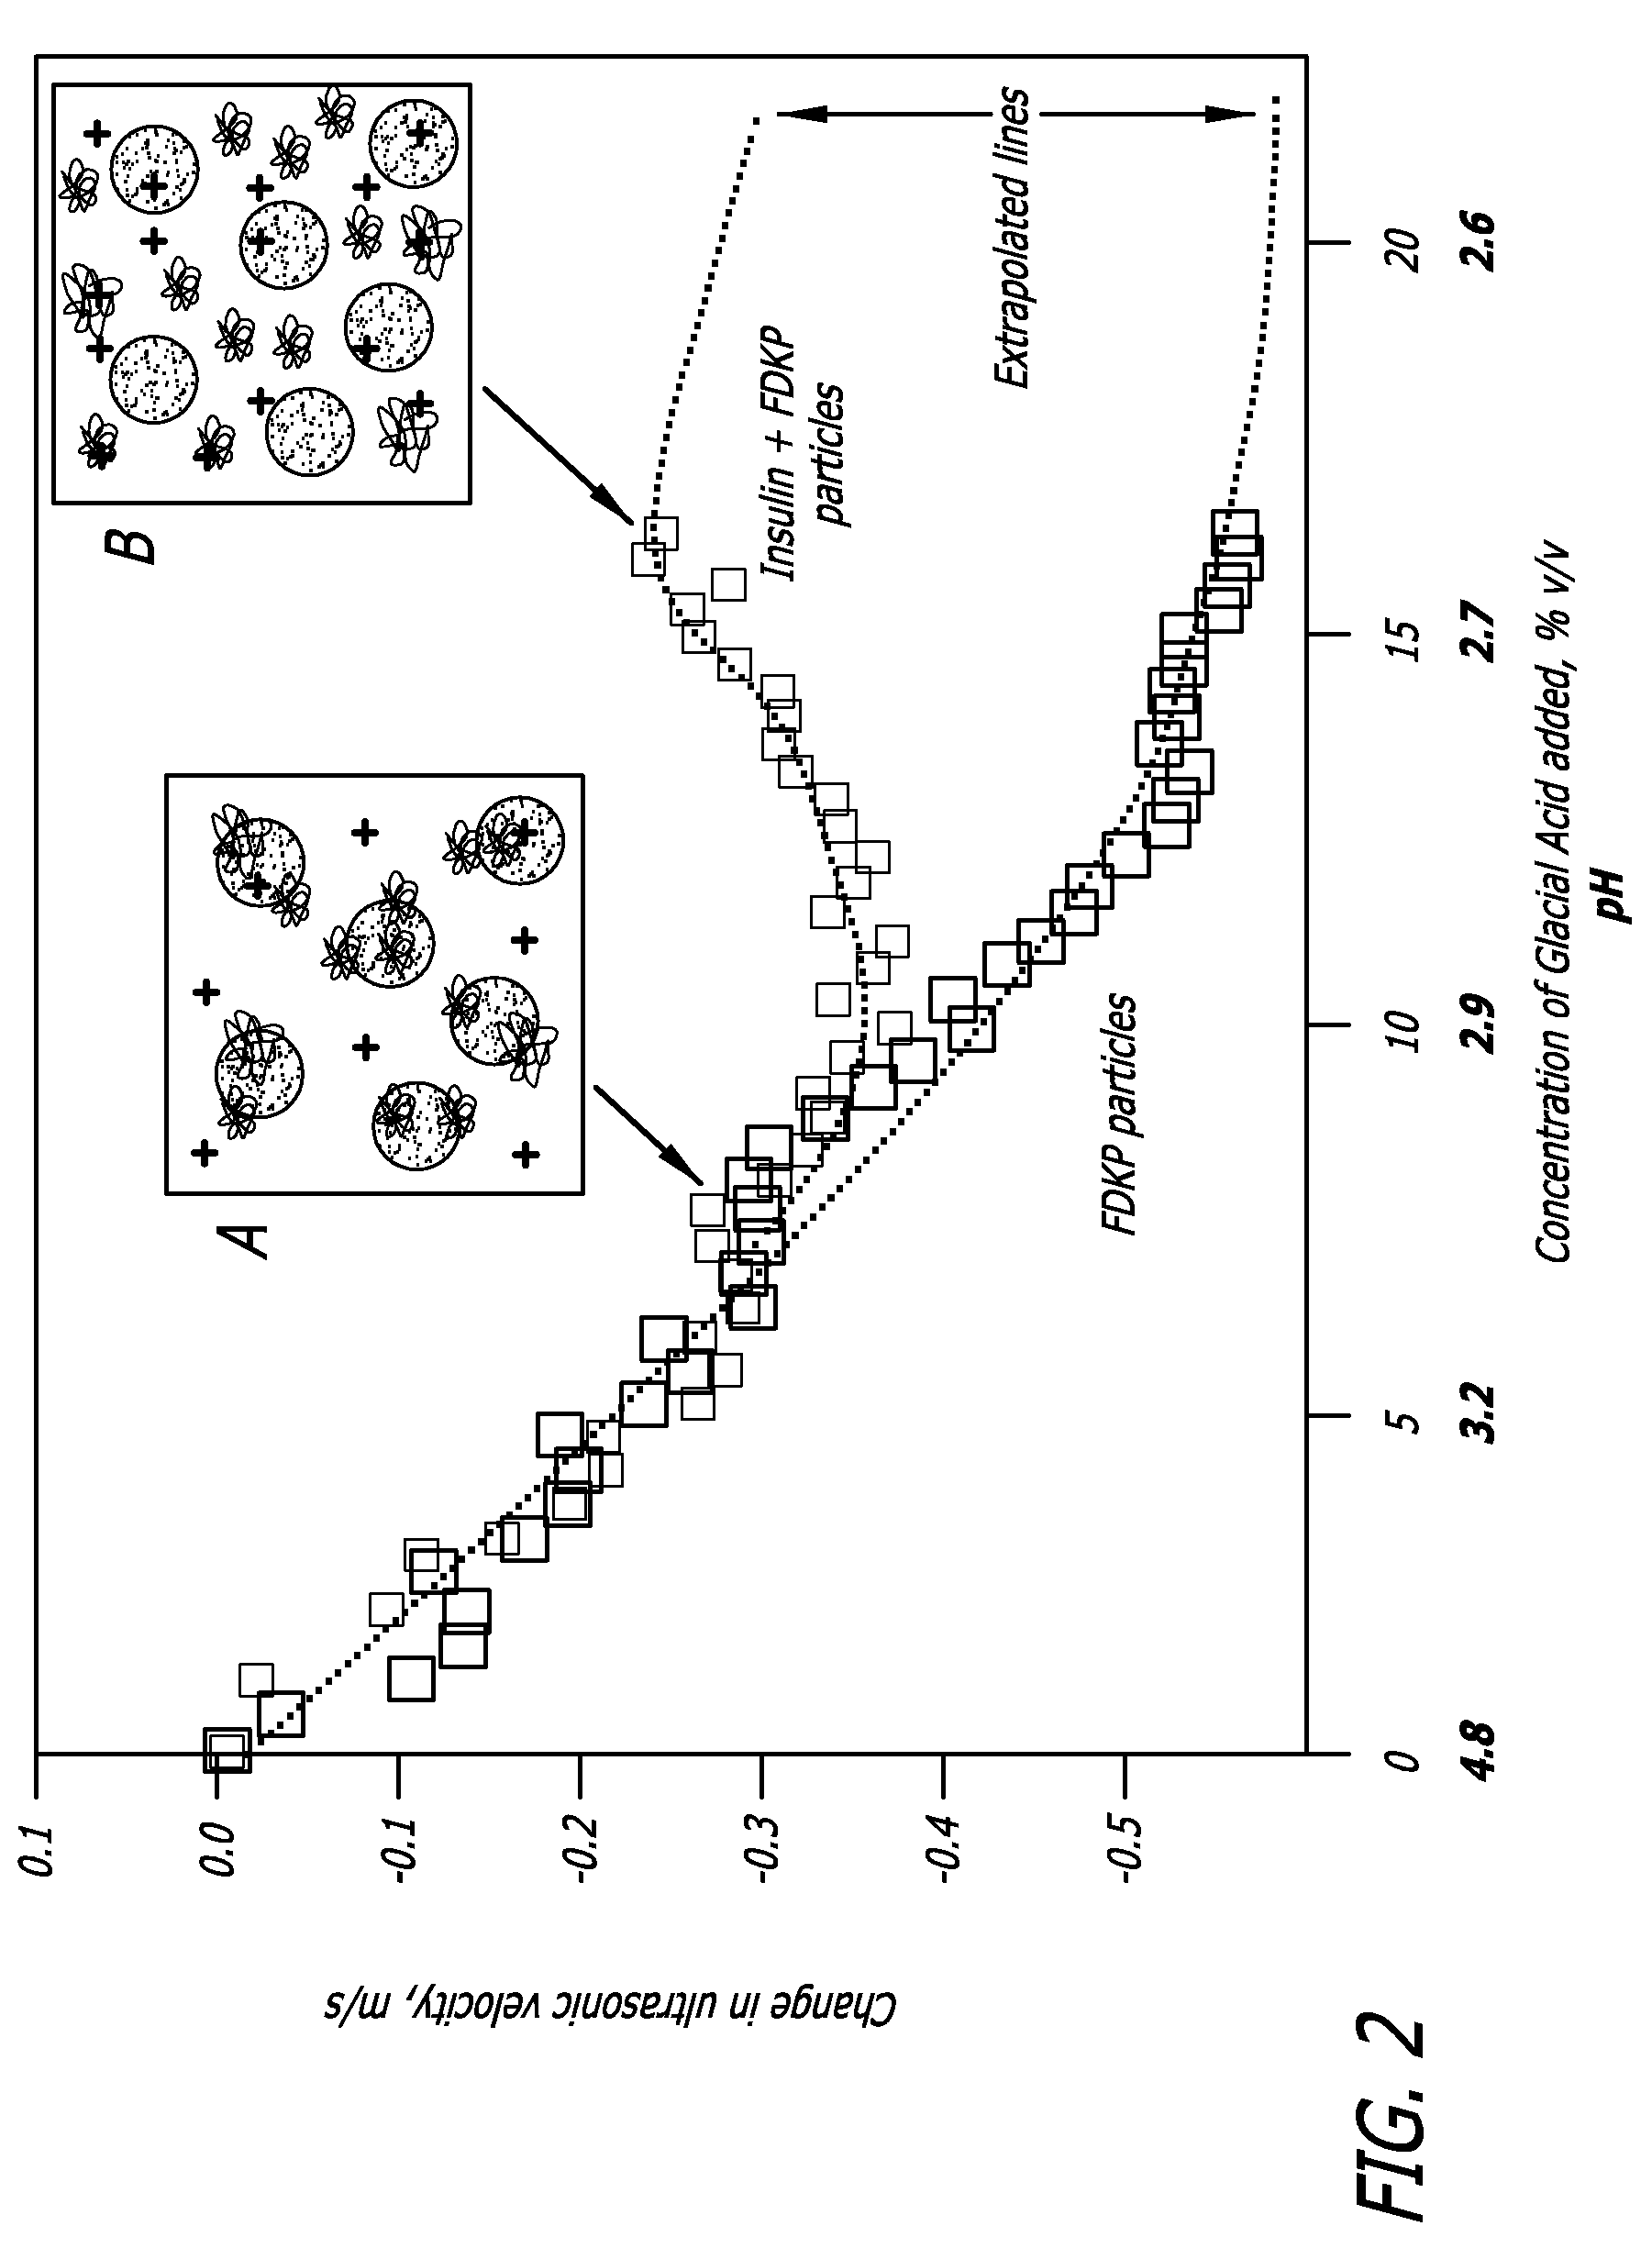 Method of drug formulation based on increasing the affinity of crystalline microparticle surfaces for active agents